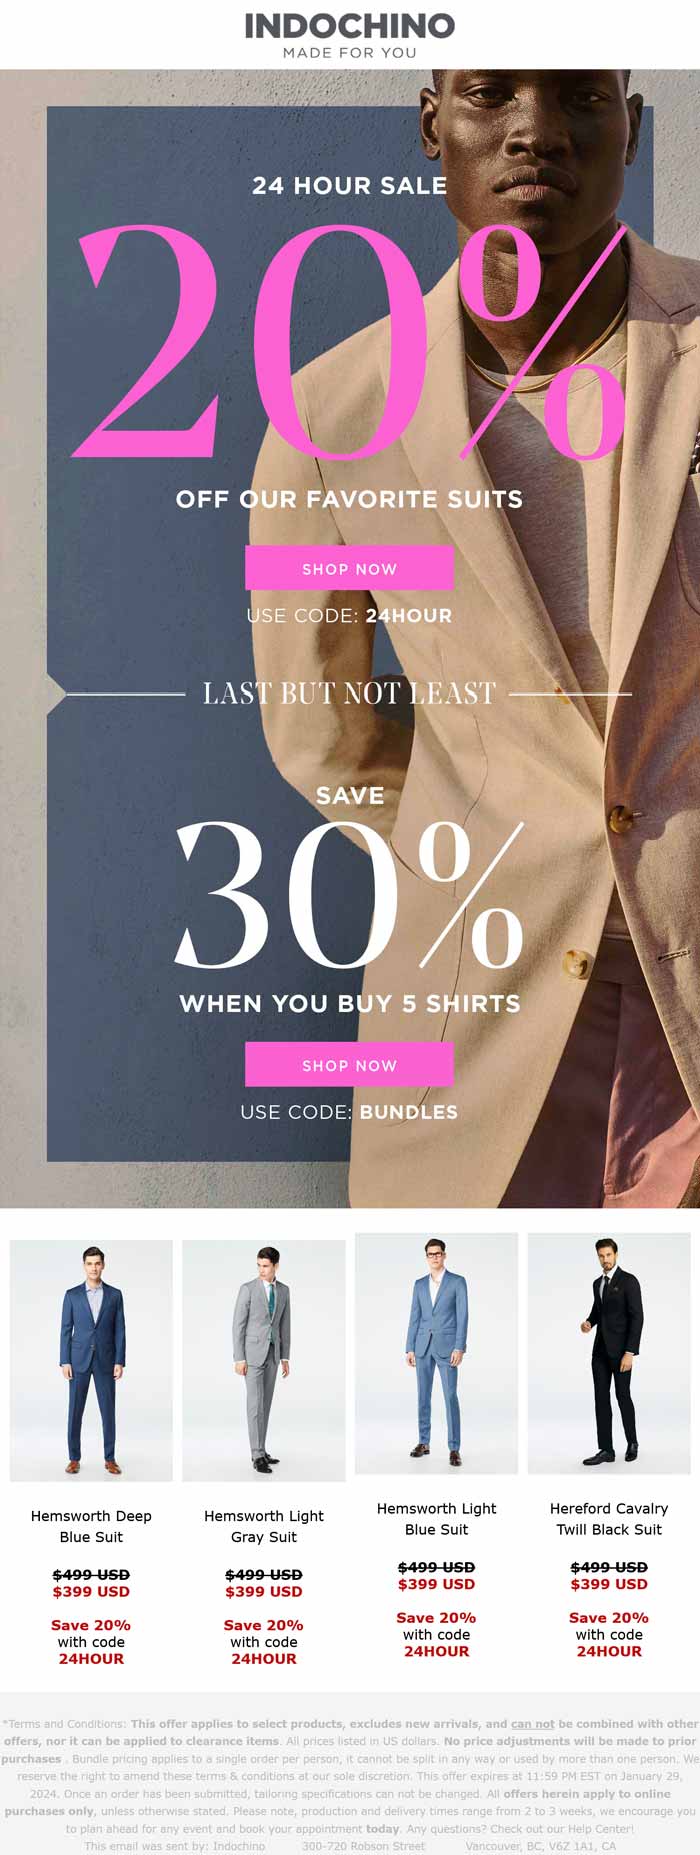 Indochino stores Coupon  20% off suits today at Indochino via promo code 24HOUR #indochino 